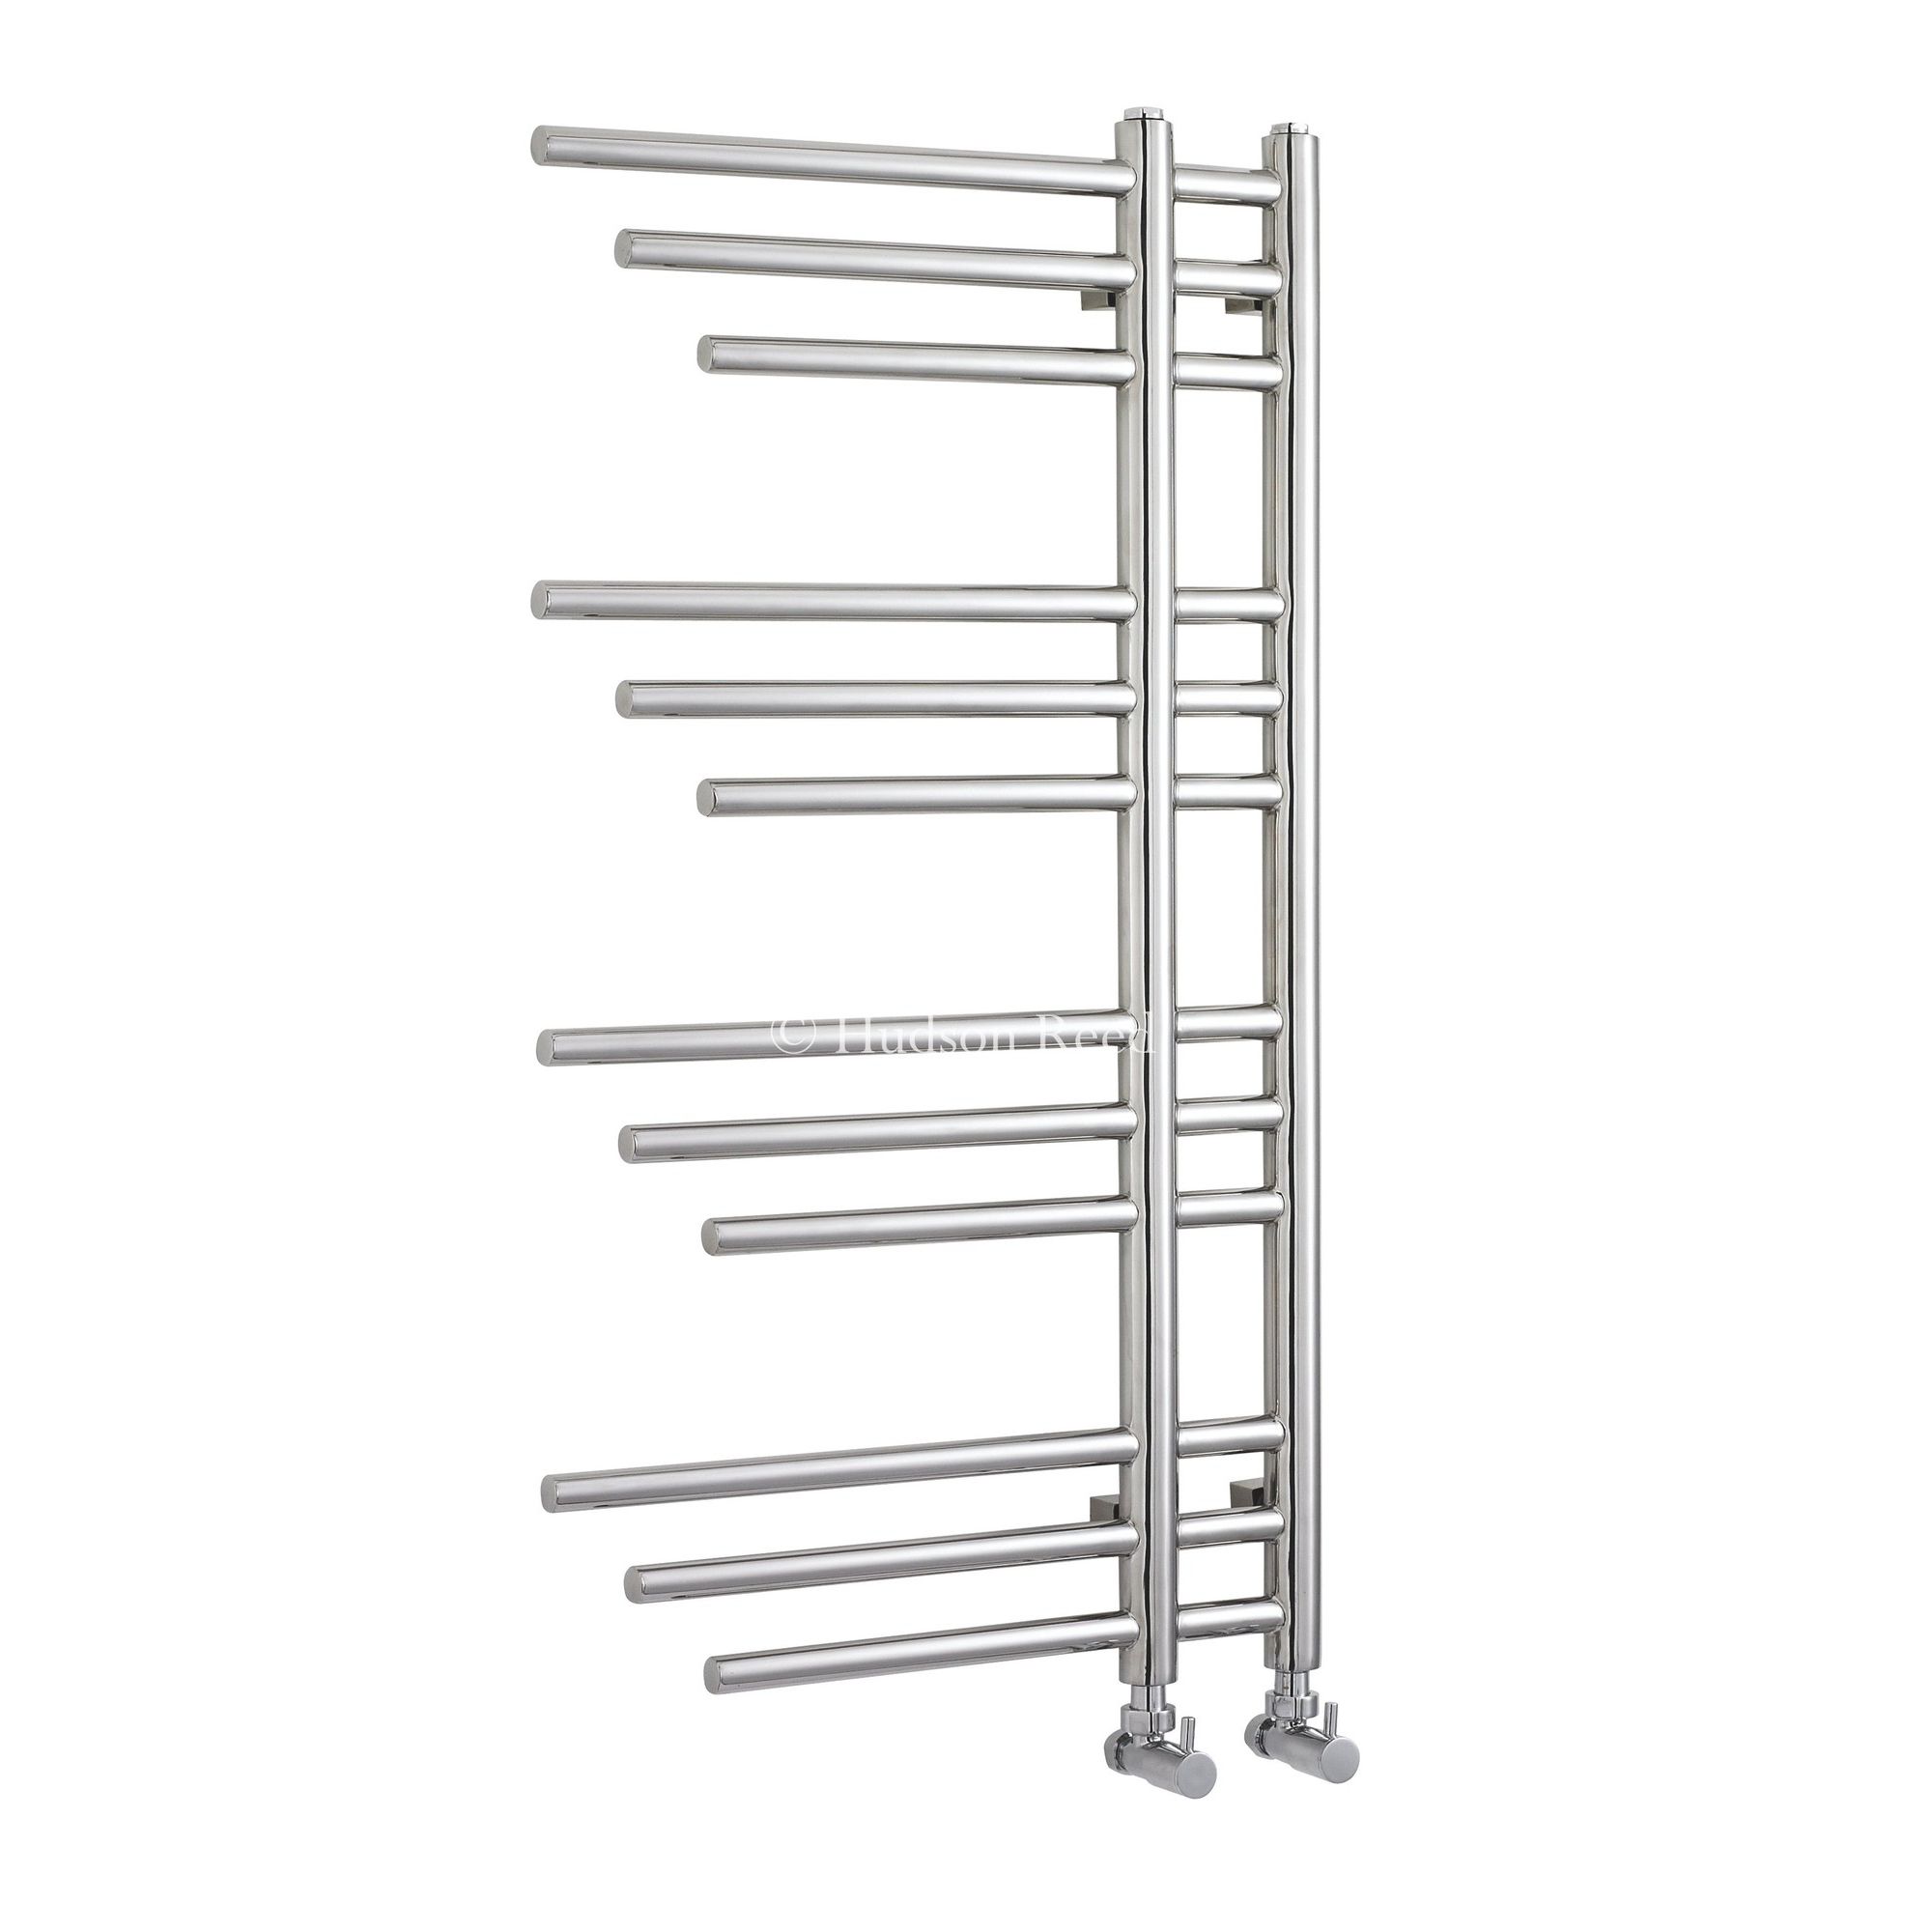 Hudson Reed Finesse Radiator in Stainless - 90 cm x 50 cm at Tesco Direct